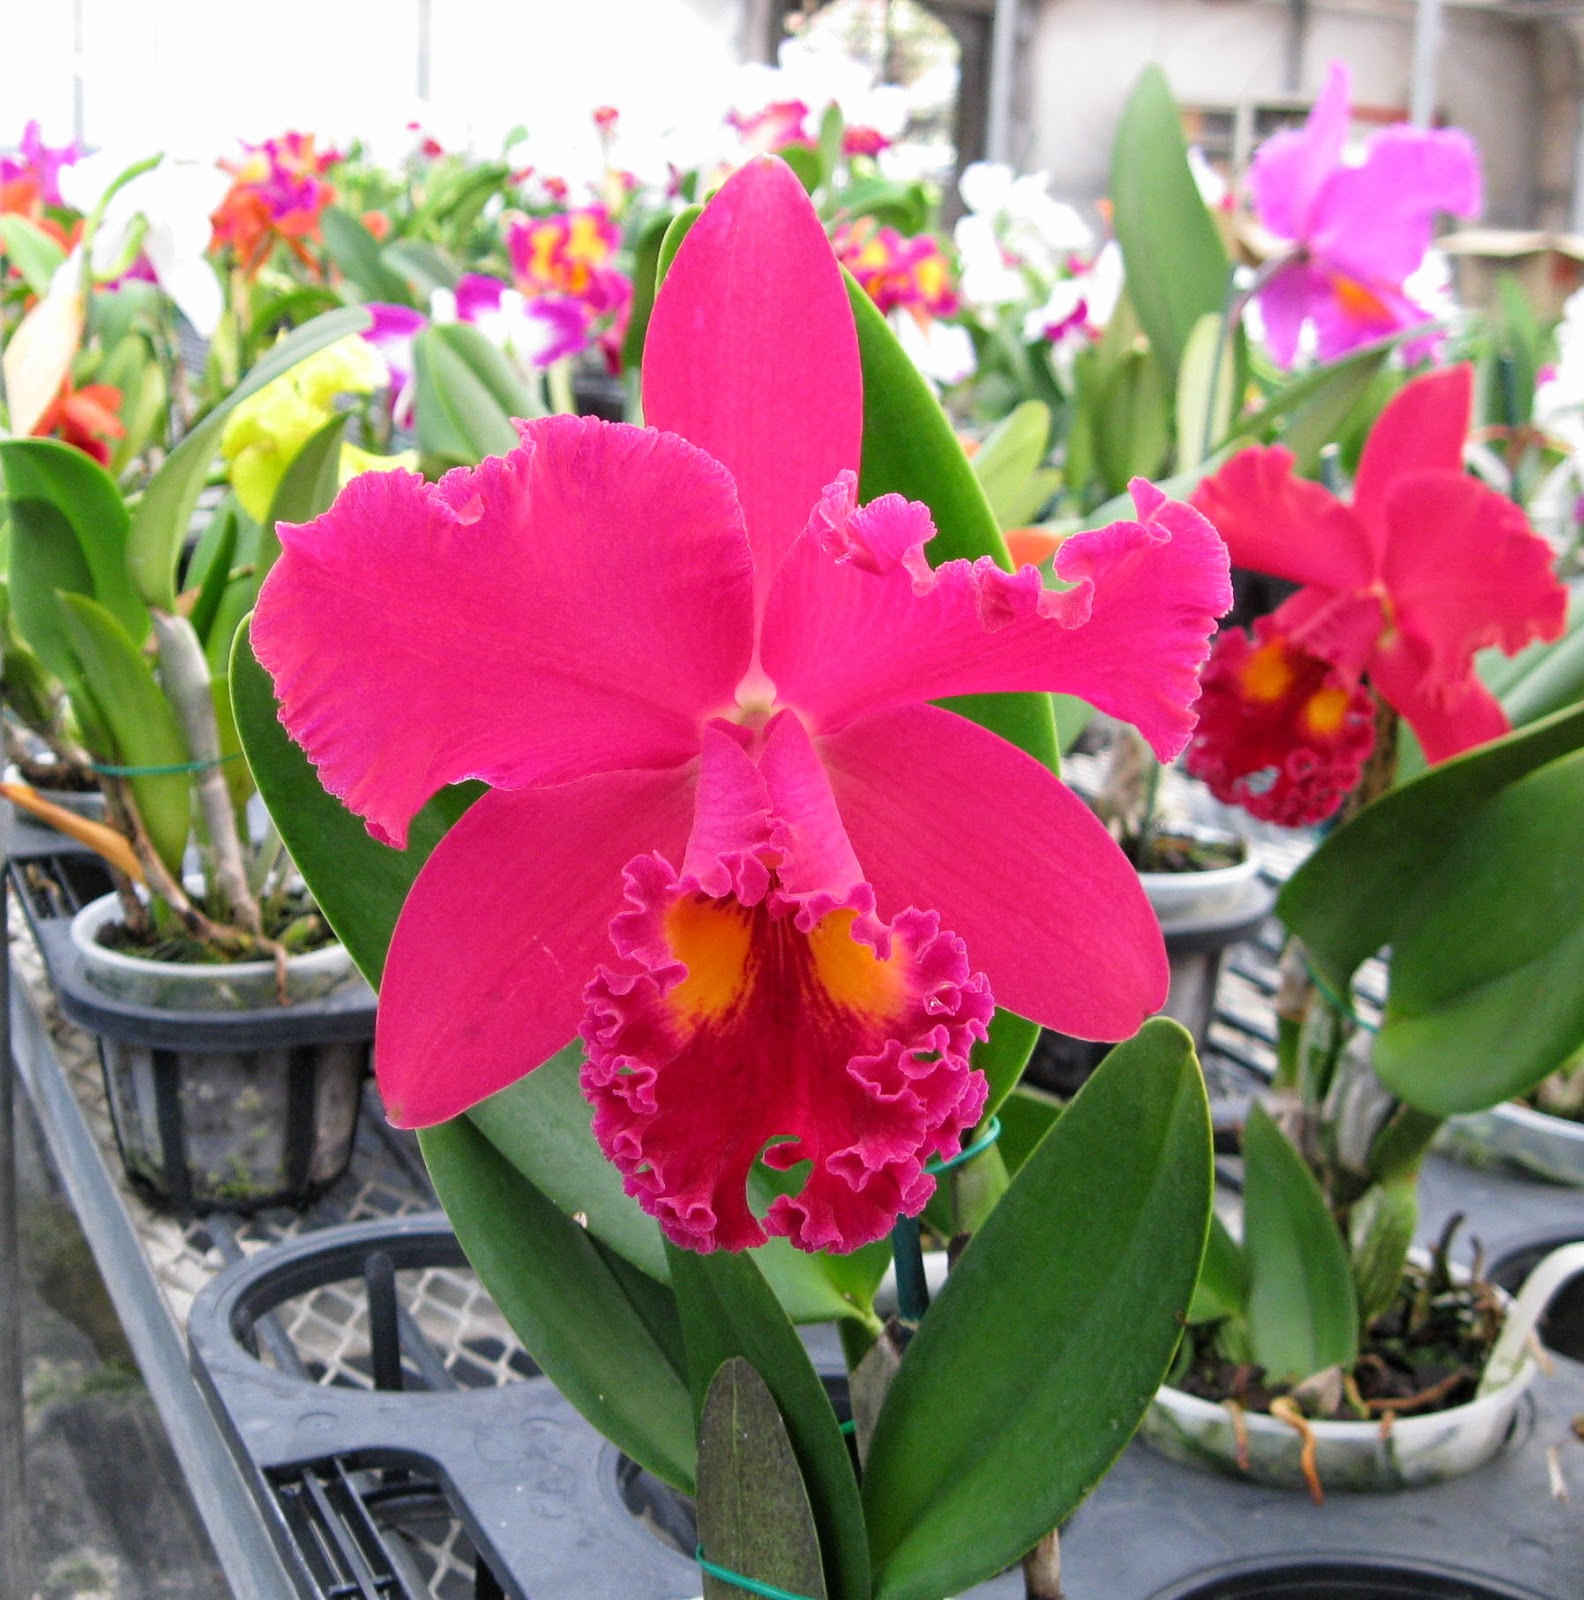 Rsc. Ahchung ruby Taiyoung Red Star orchid flowers